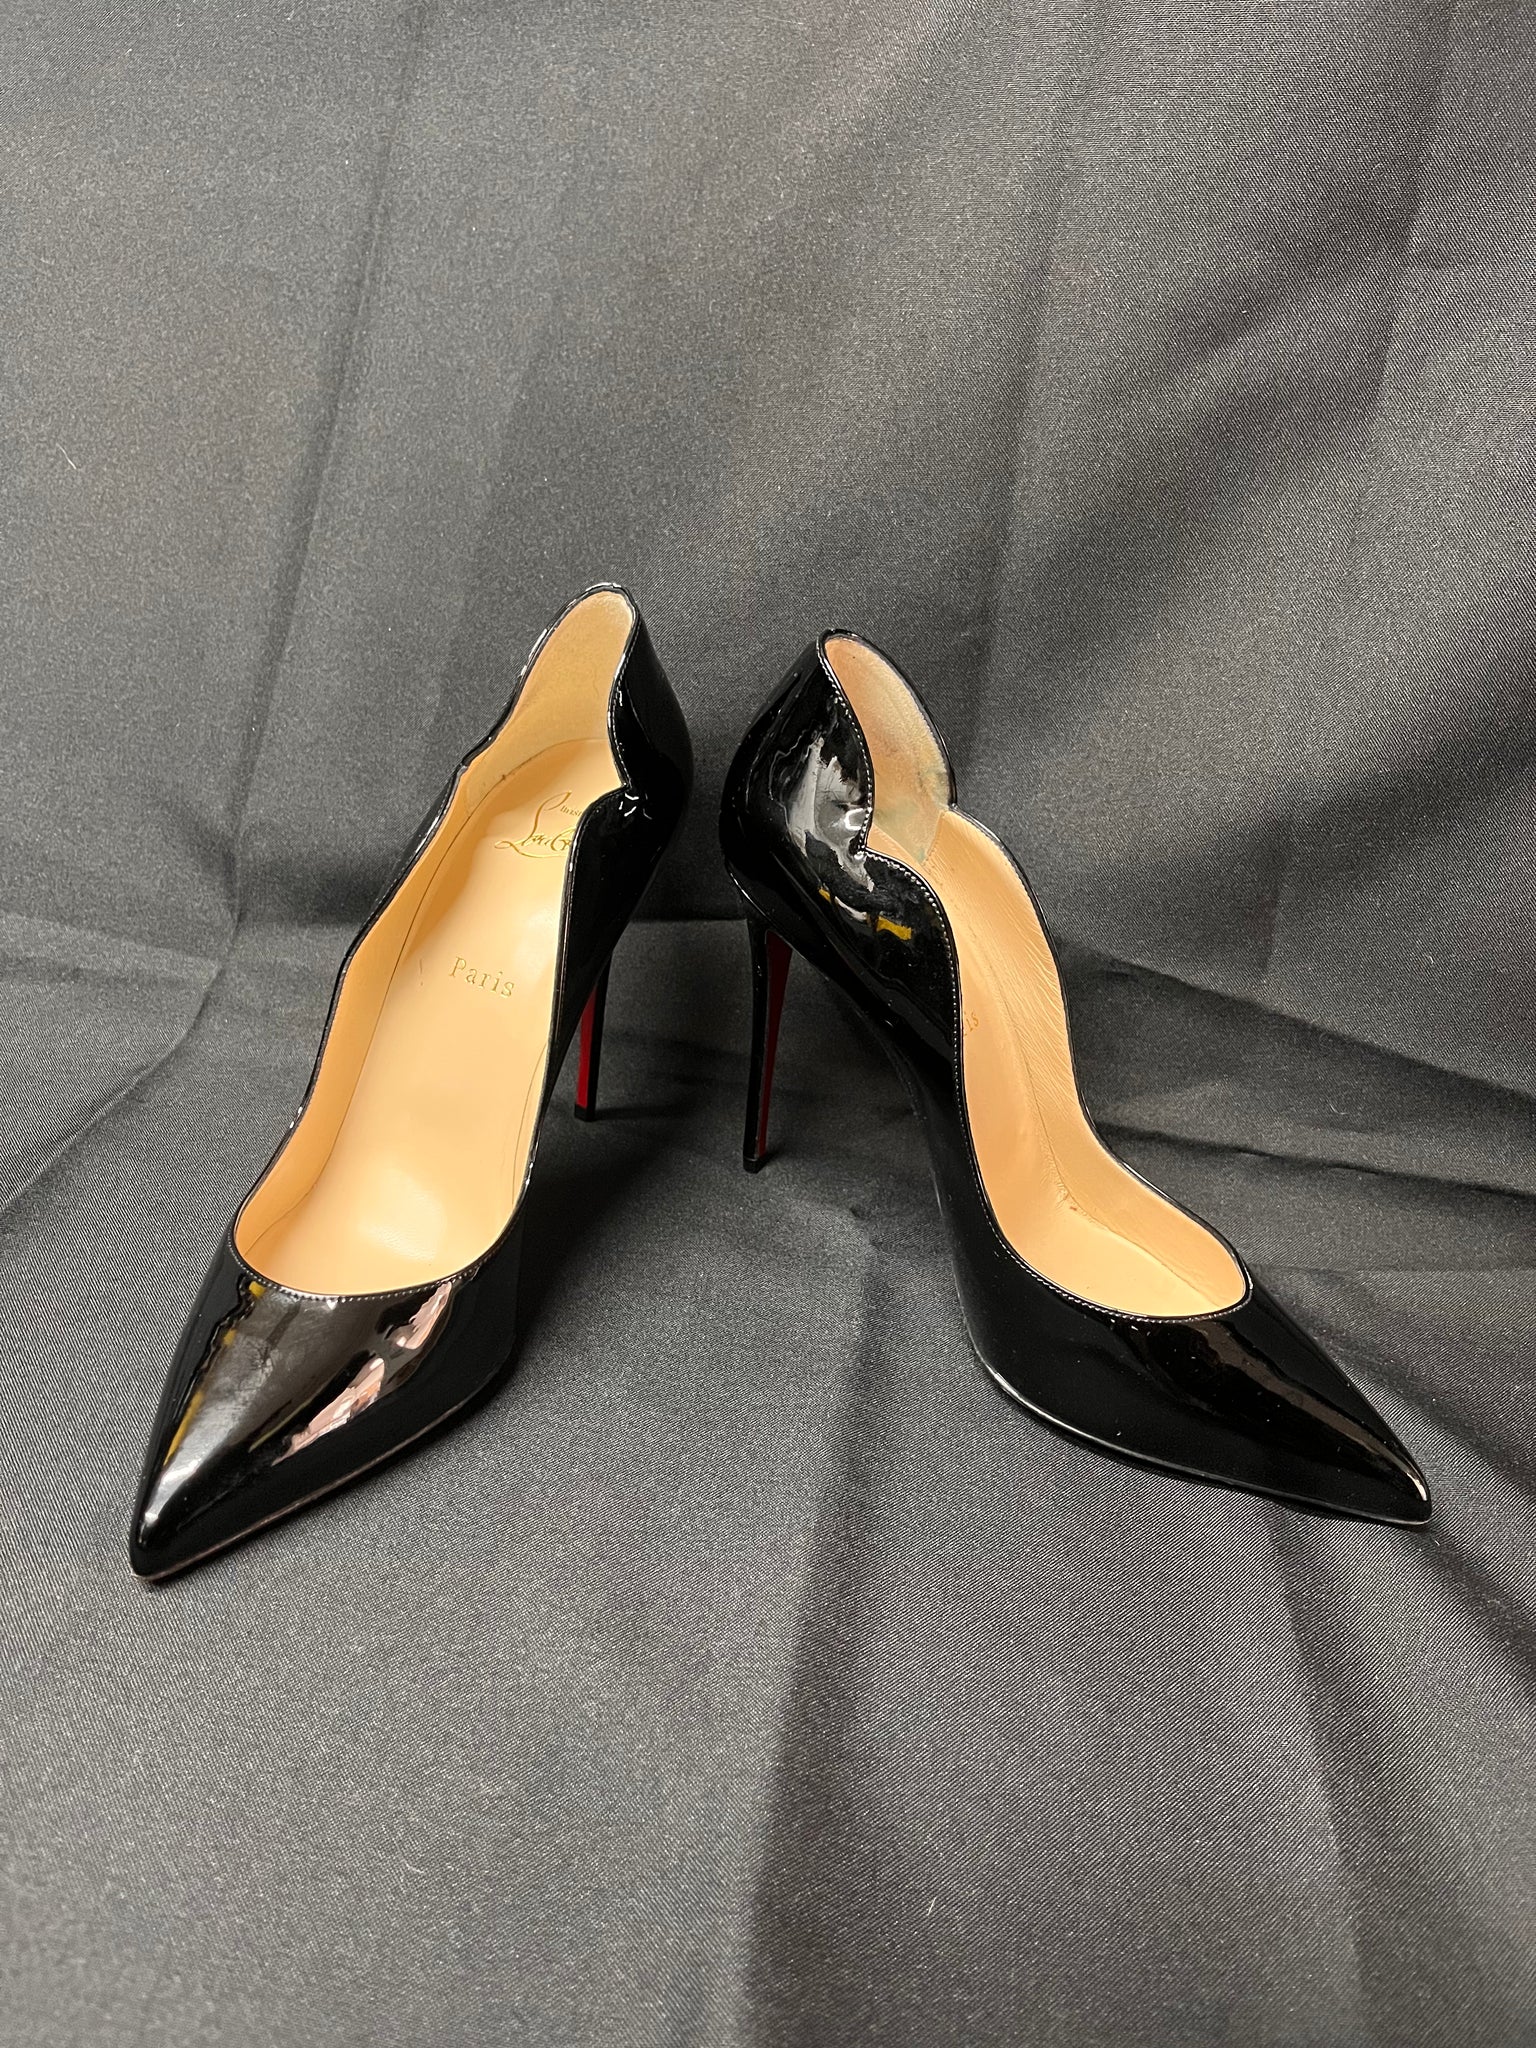  Christian Louboutin Hot Chick 100mm Patent Leather